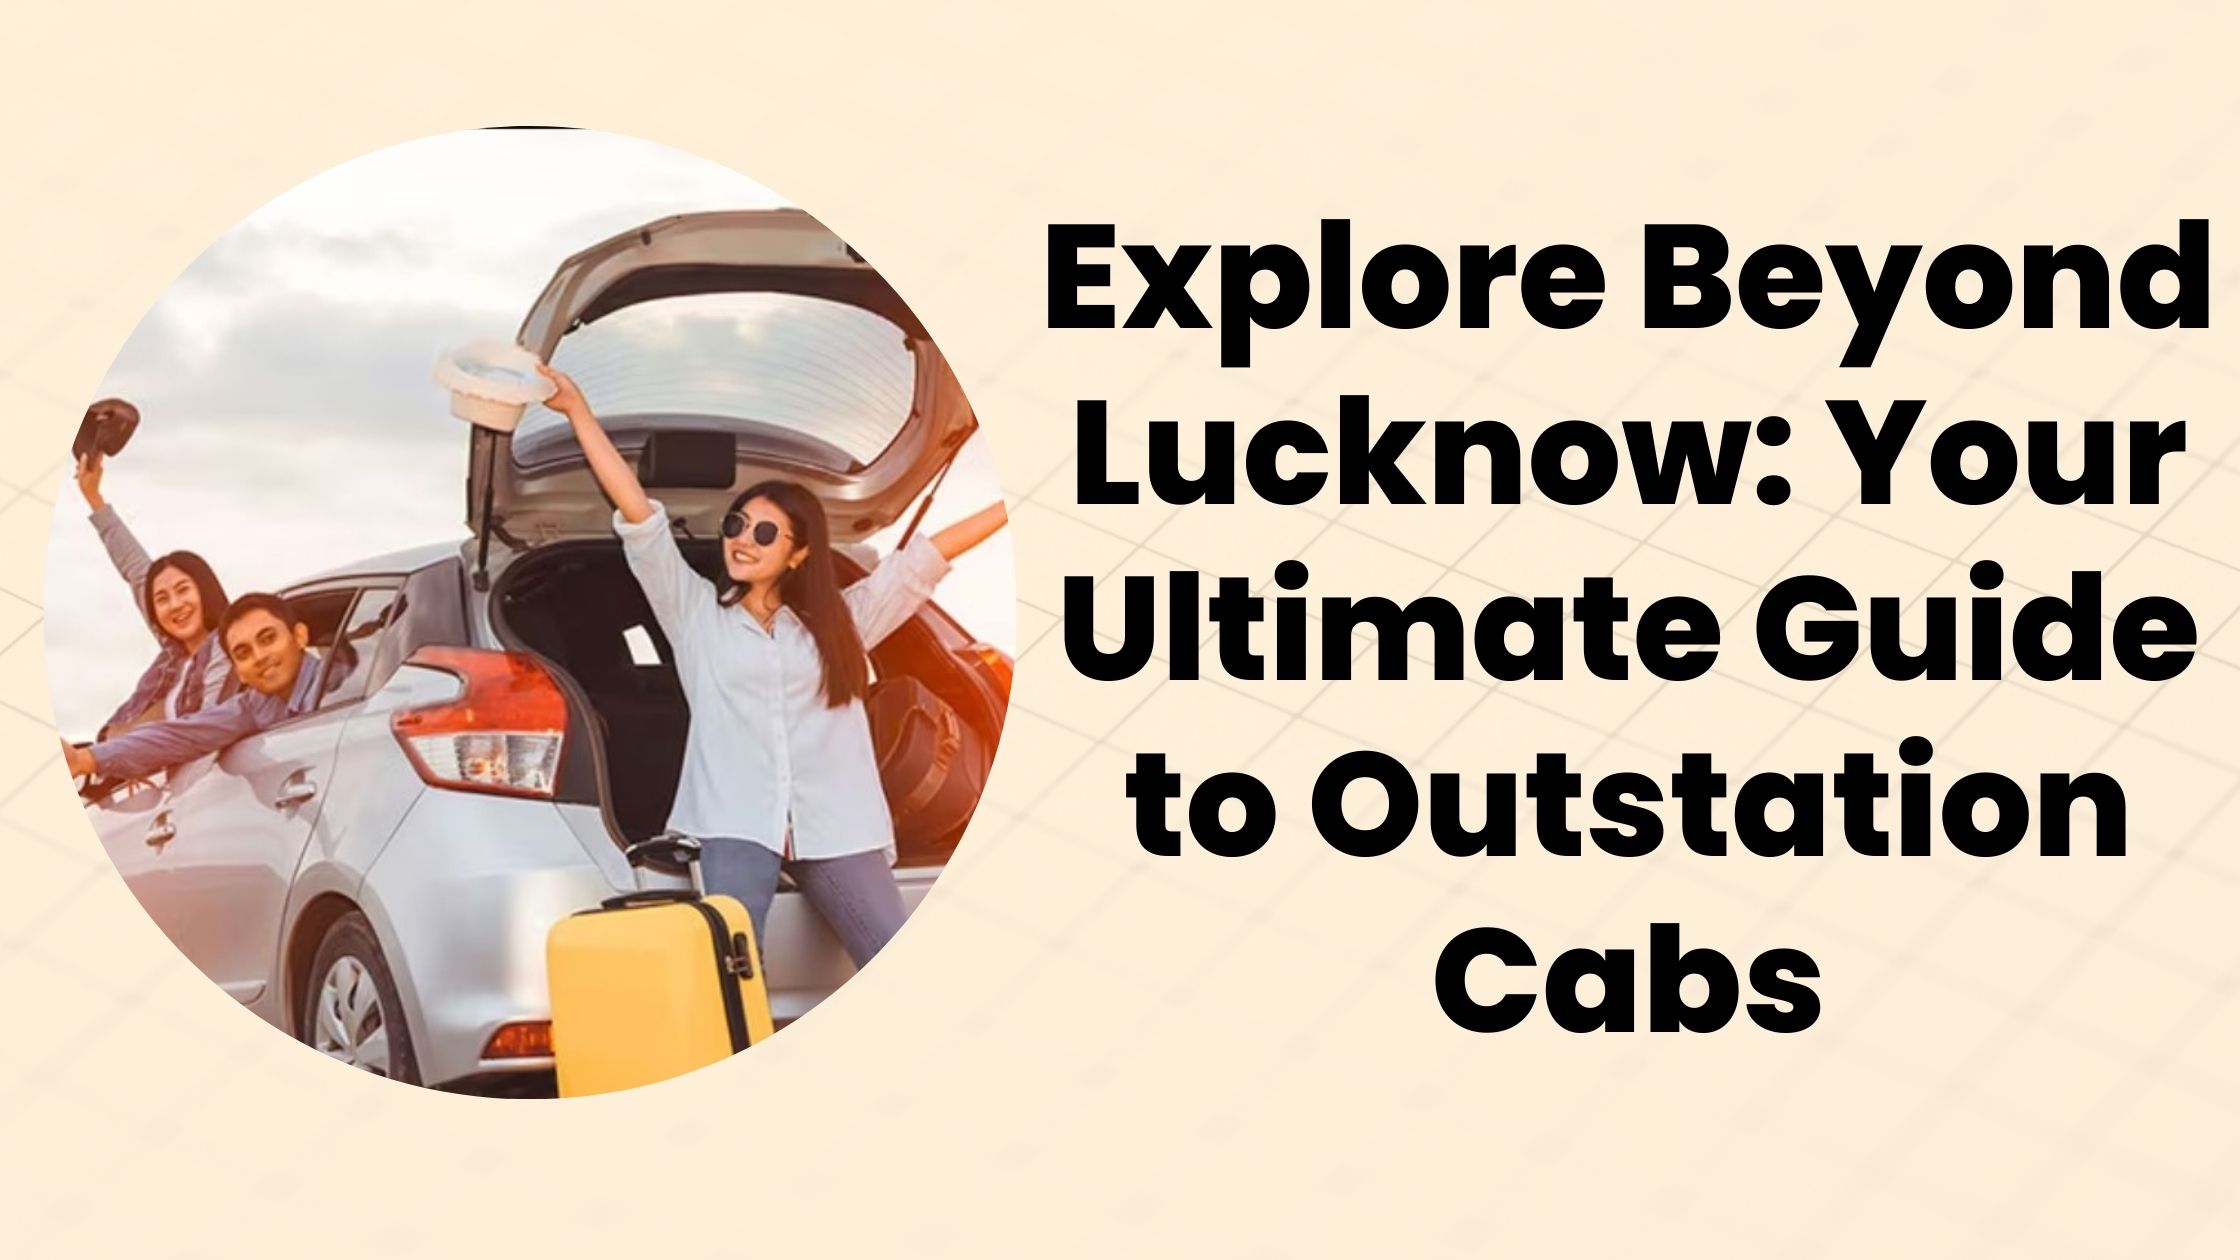 Explore Beyond Lucknow: Your Ultimate Guide to Outstation Cabs